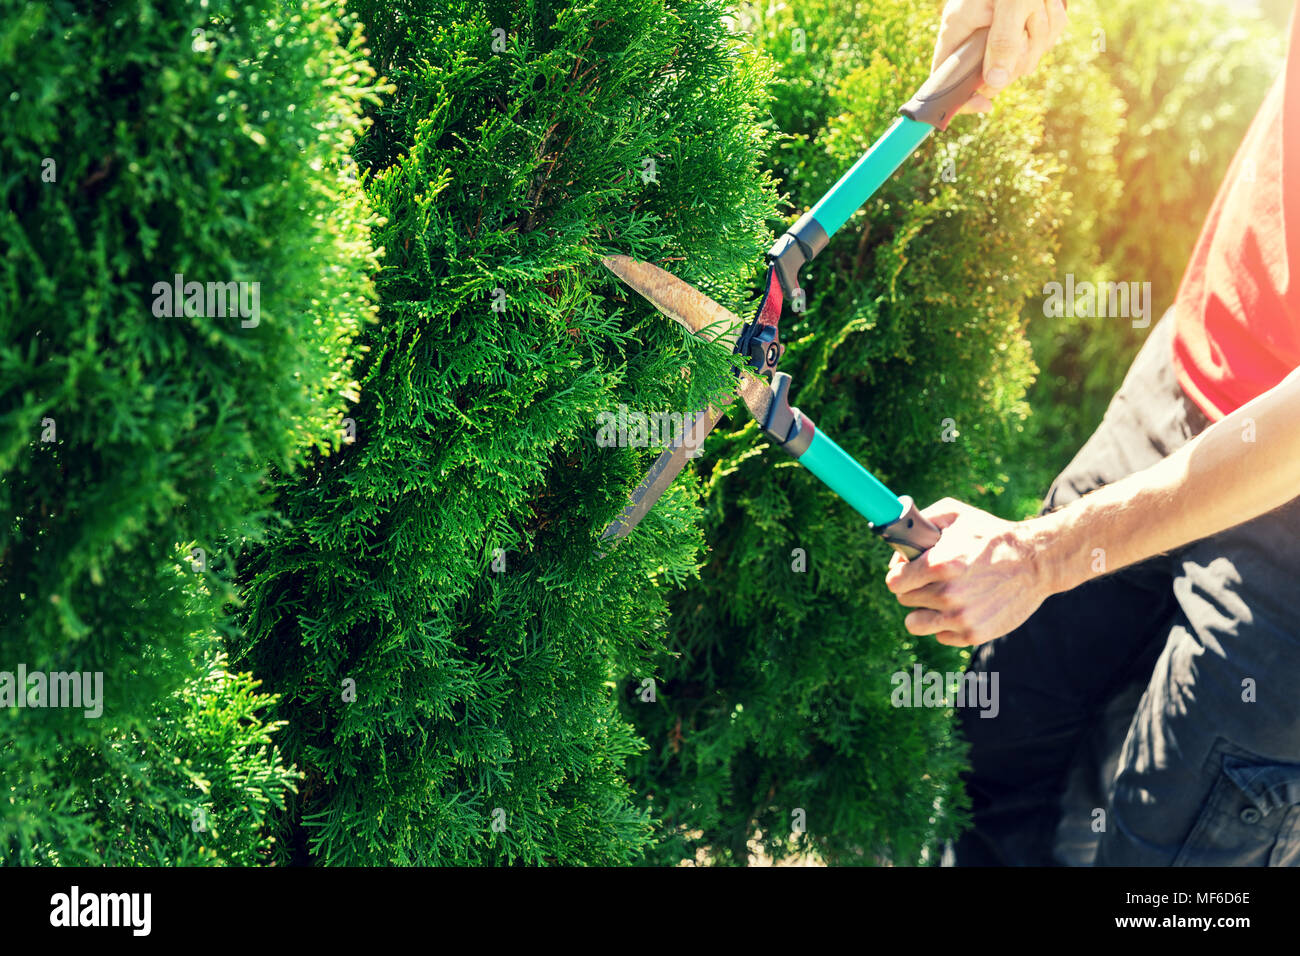 cutting thuja tree with garden hedge clippers Stock Photo